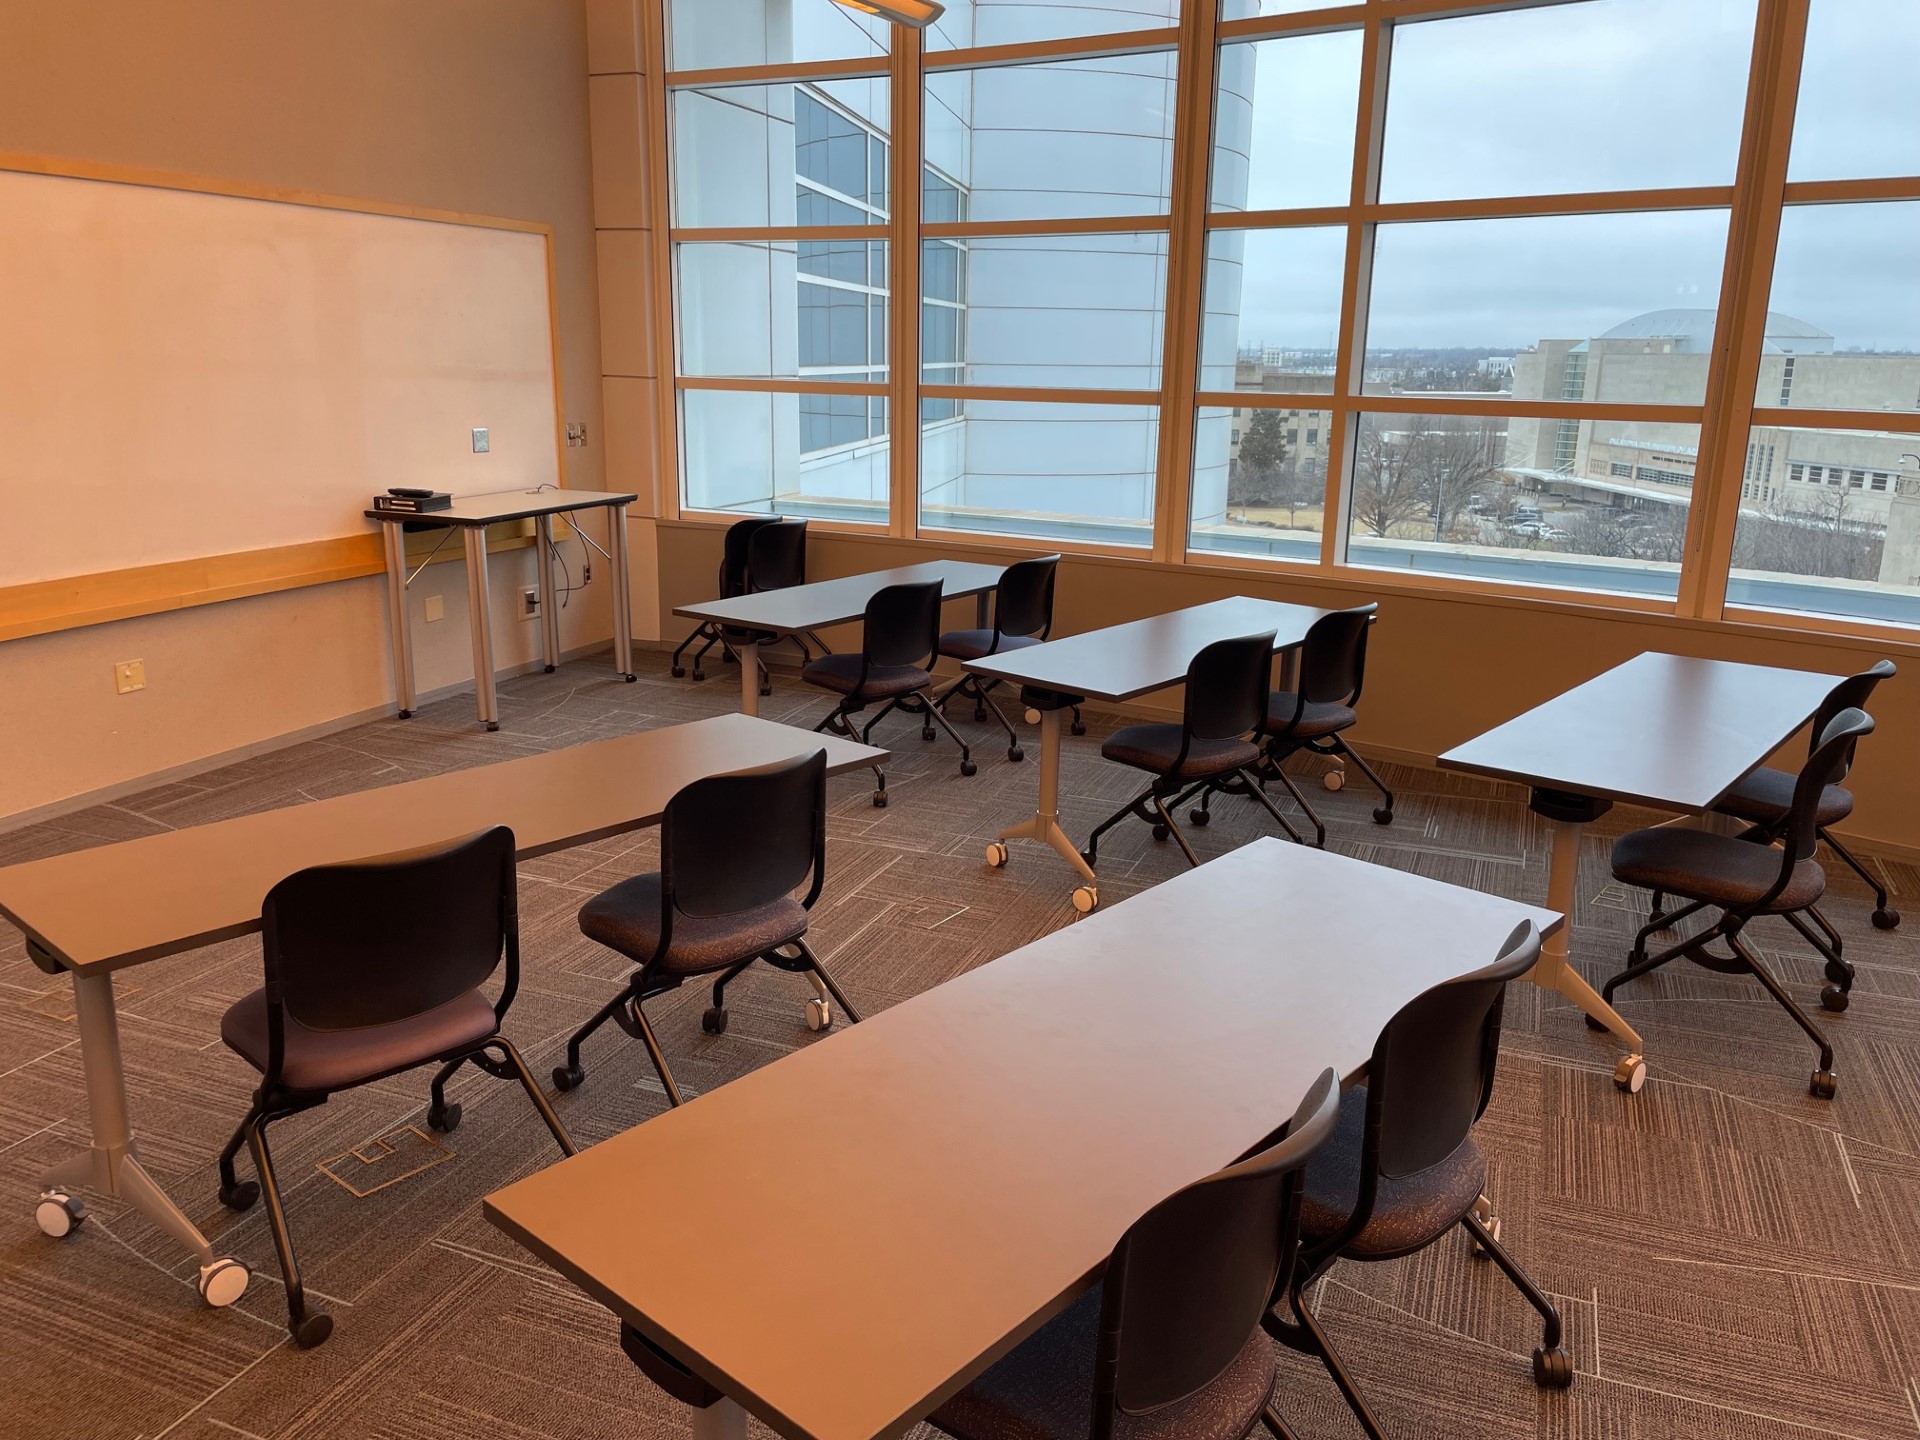 Classroom E with classroom-style seating and whiteboard